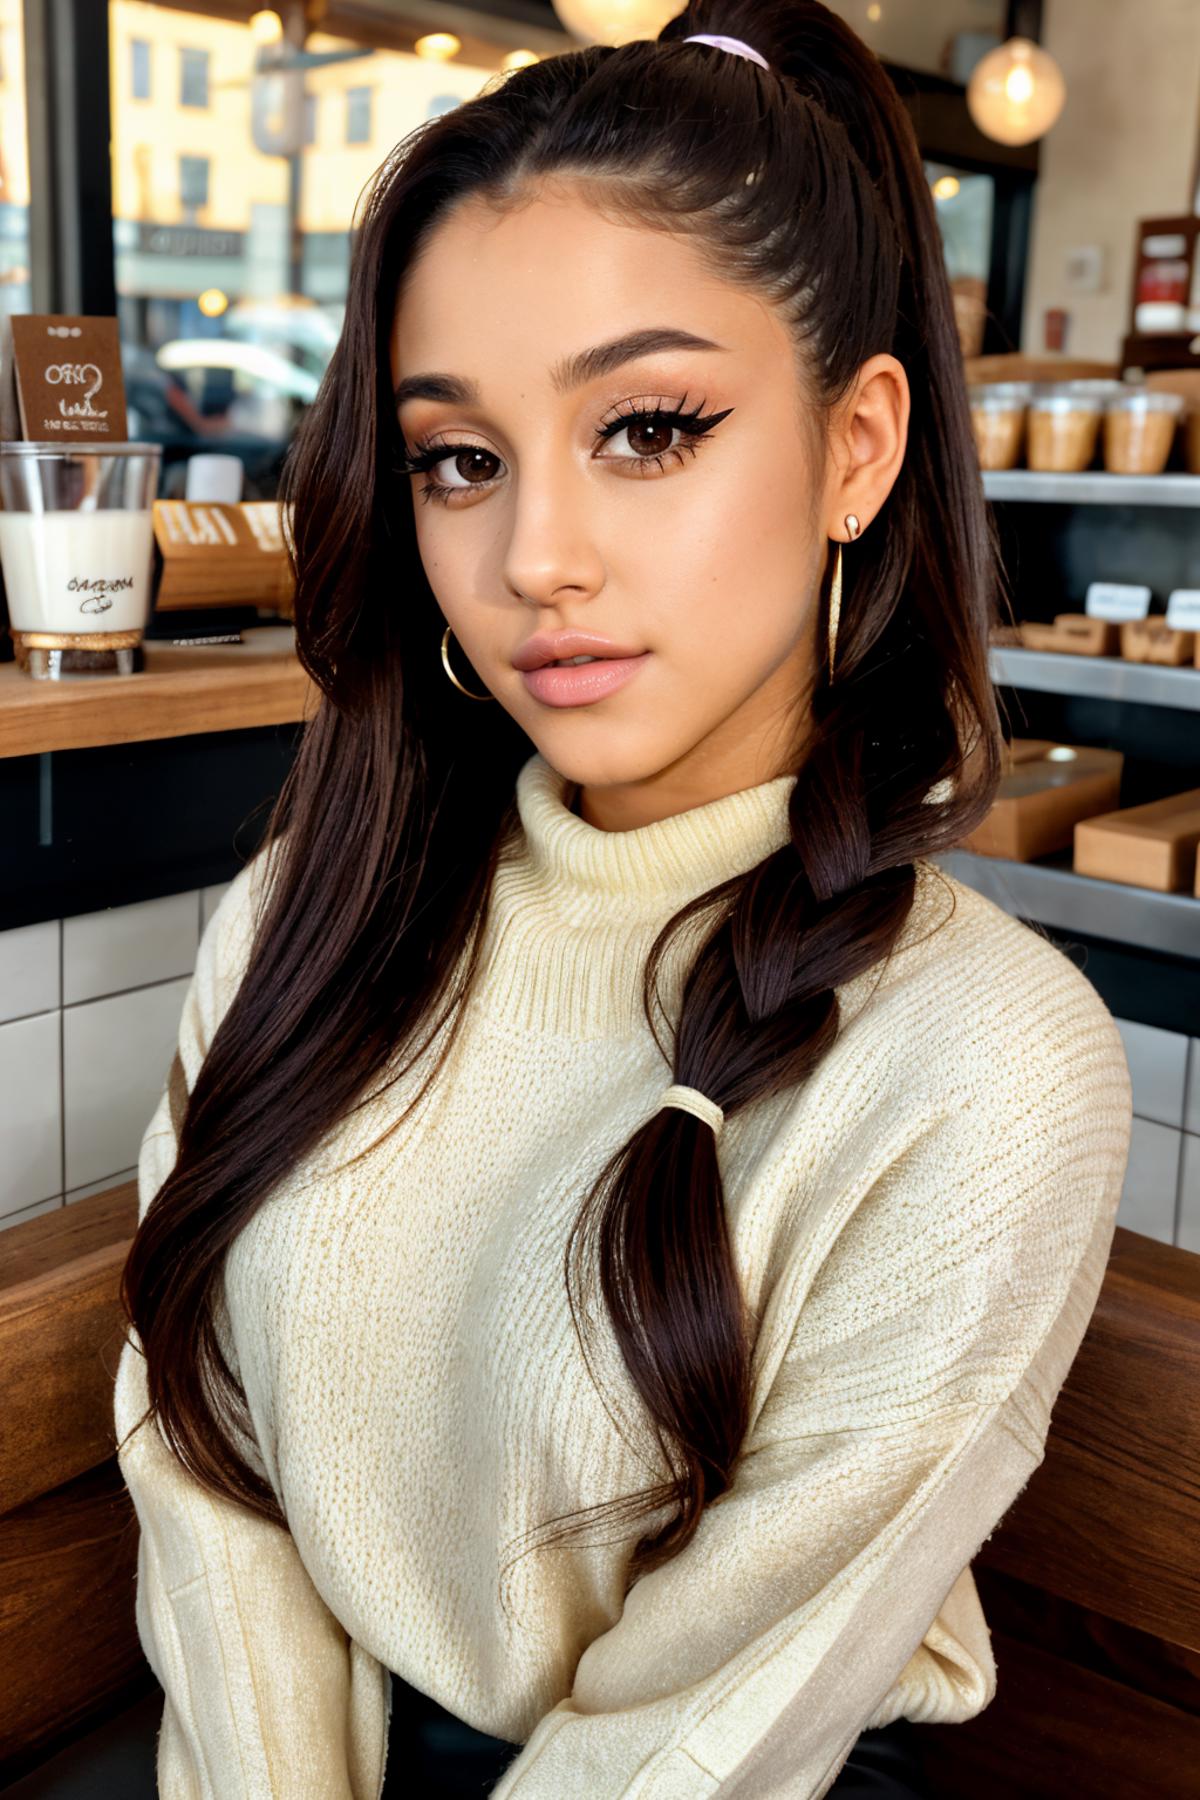 Ariana Grande image by RubberDuckie